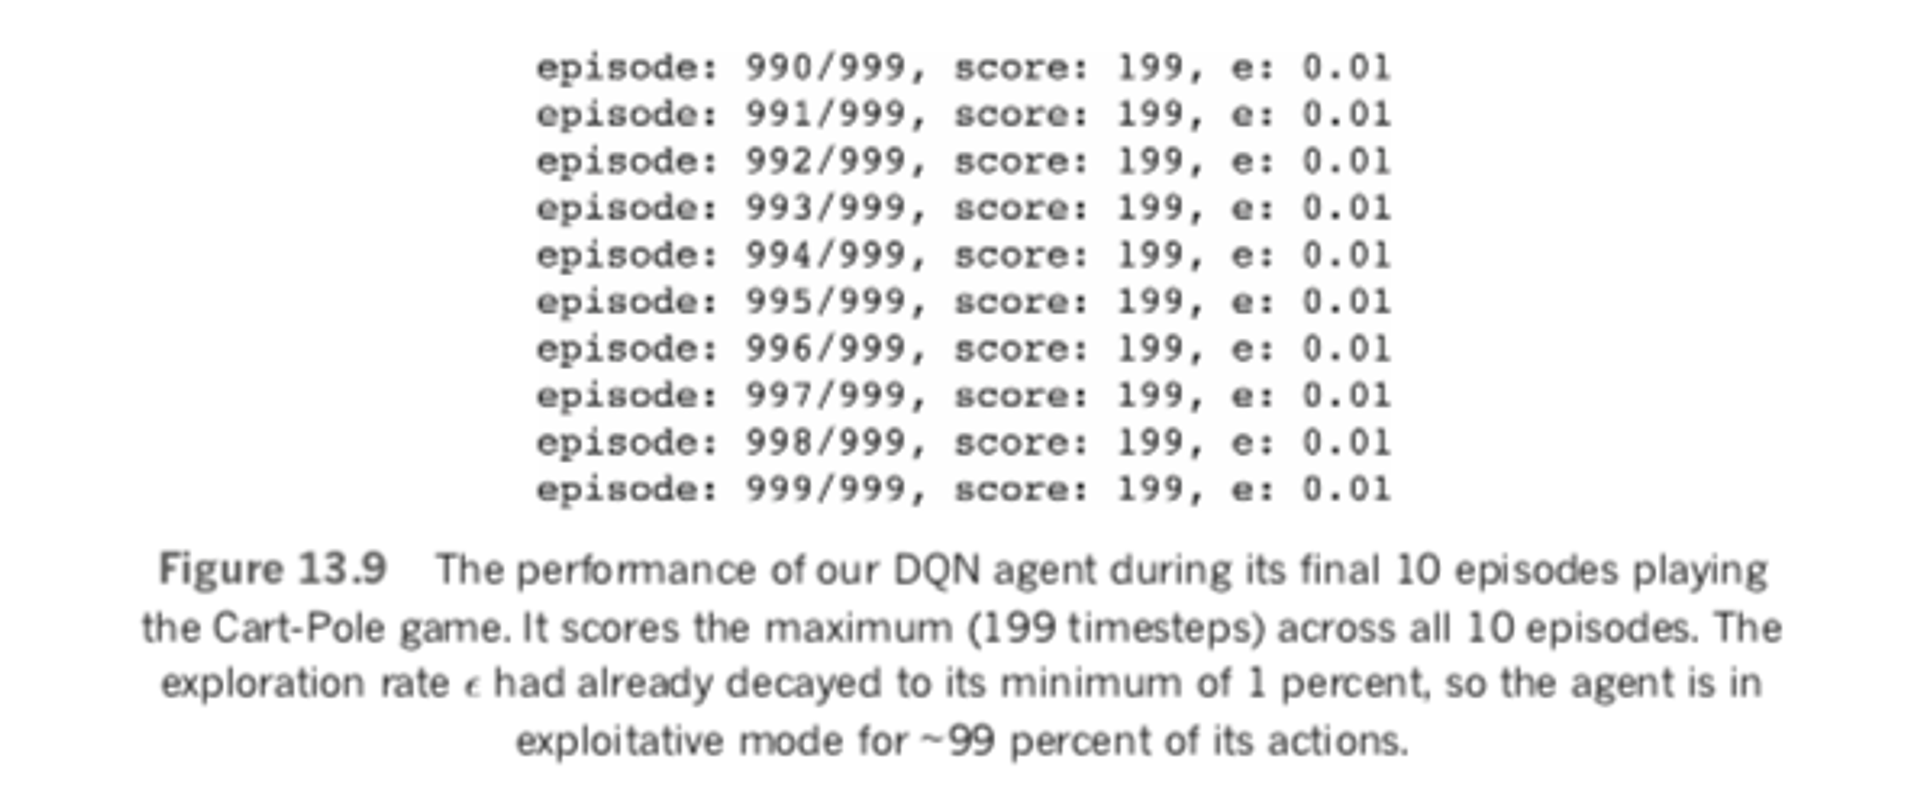 The performance of the DQN agent during its final 10 episodes